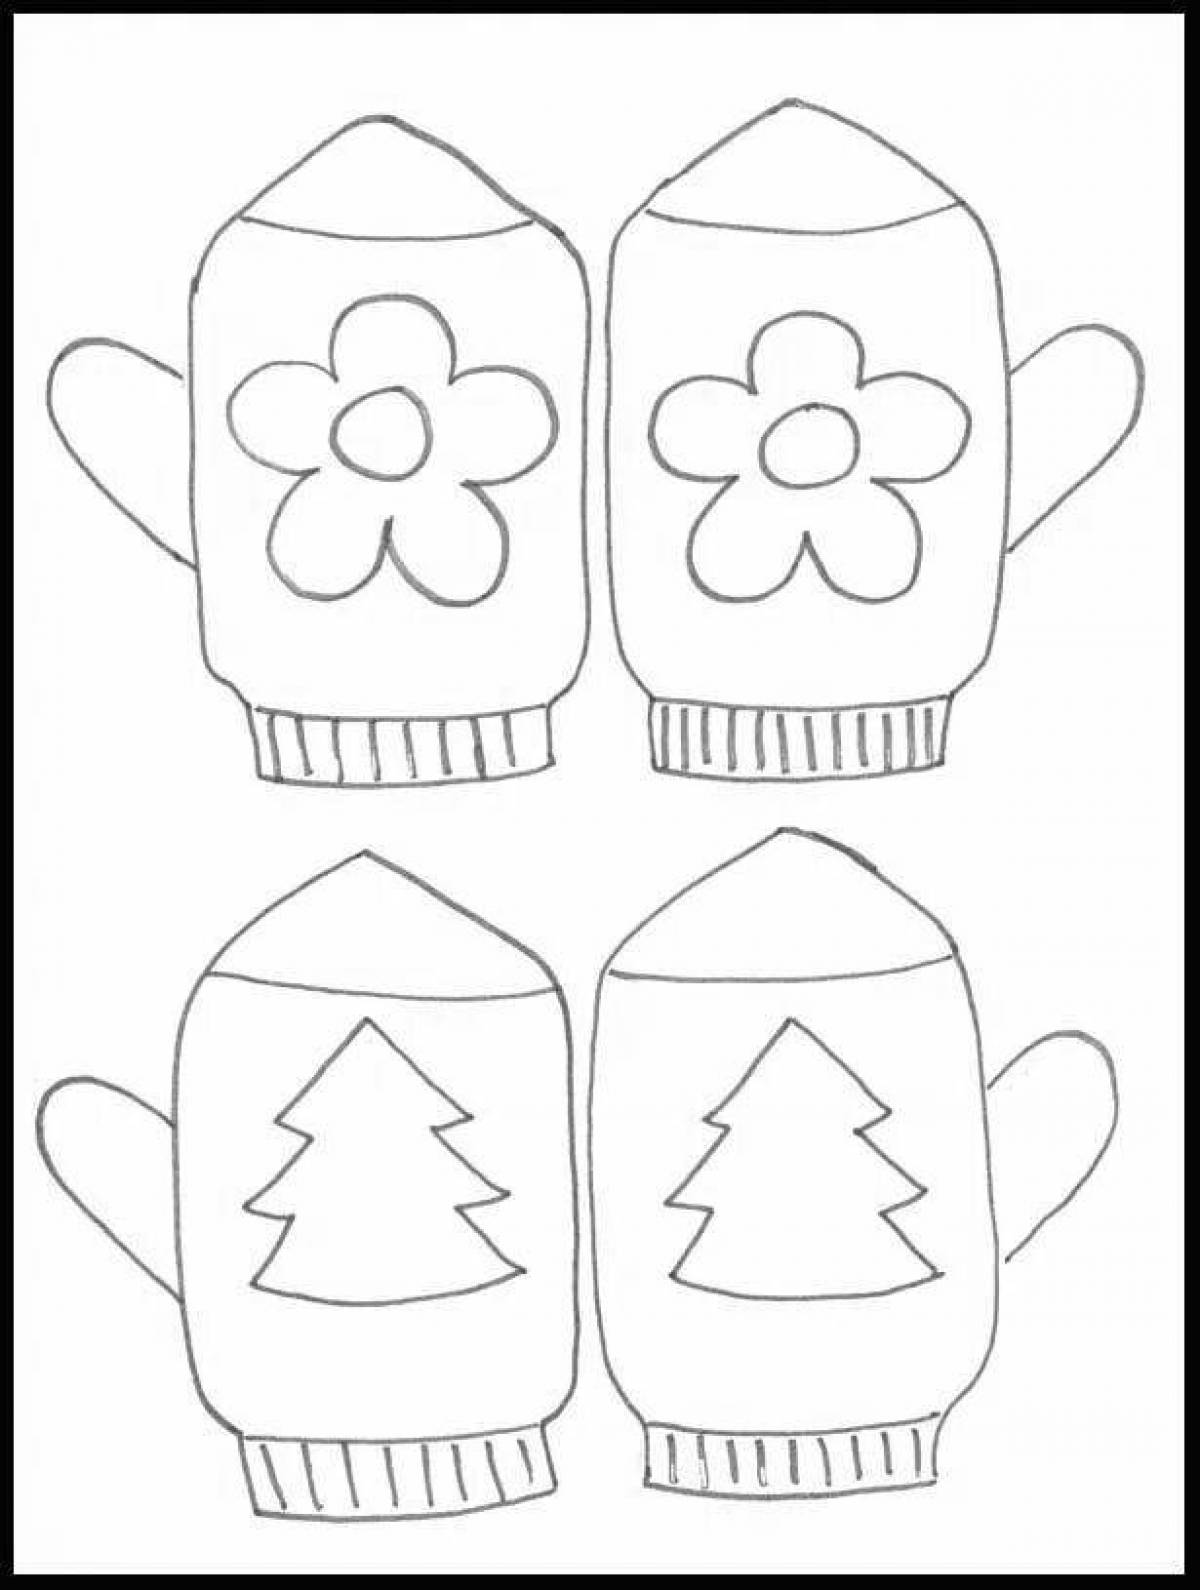 Coloring book sparkling mitten